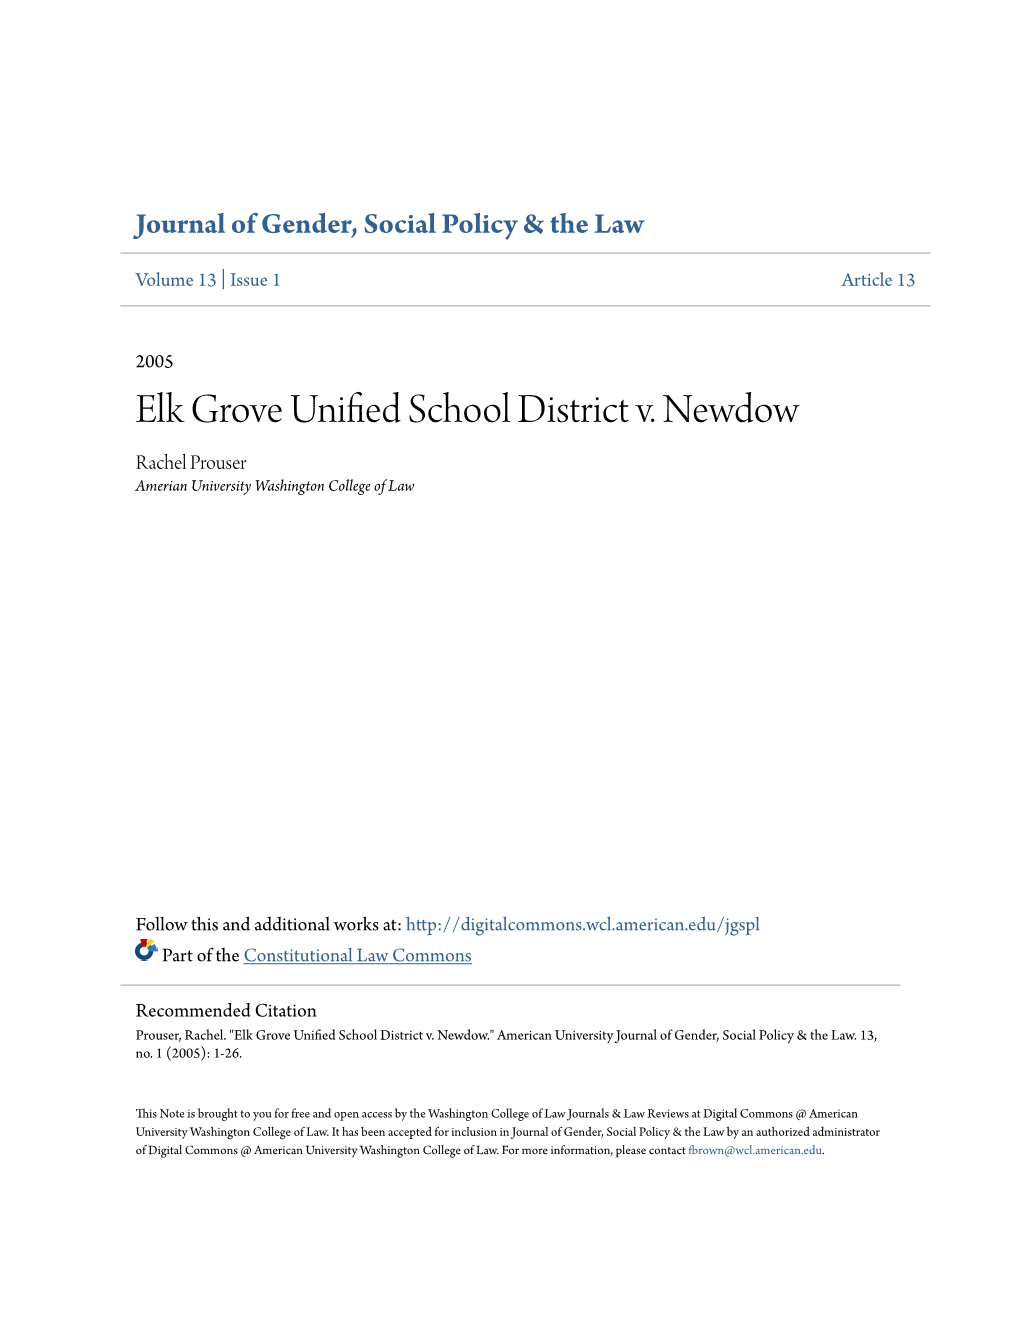 Elk Grove Unified School District V. Newdow." American University Journal of Gender, Social Policy & the Law